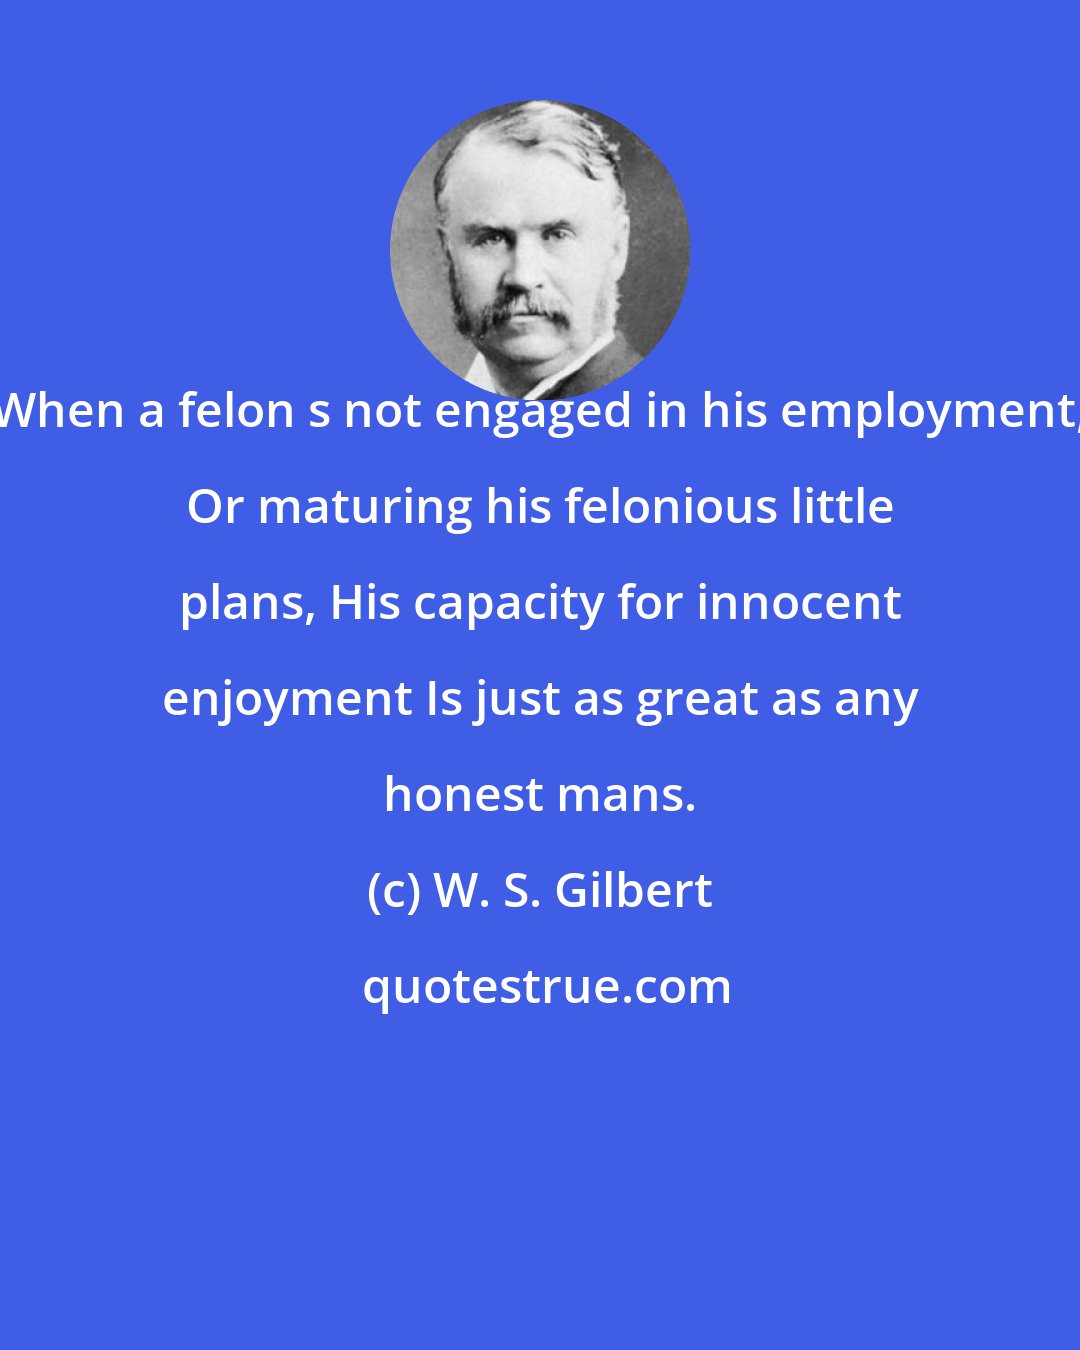 W. S. Gilbert: When a felon s not engaged in his employment, Or maturing his felonious little plans, His capacity for innocent enjoyment Is just as great as any honest mans.